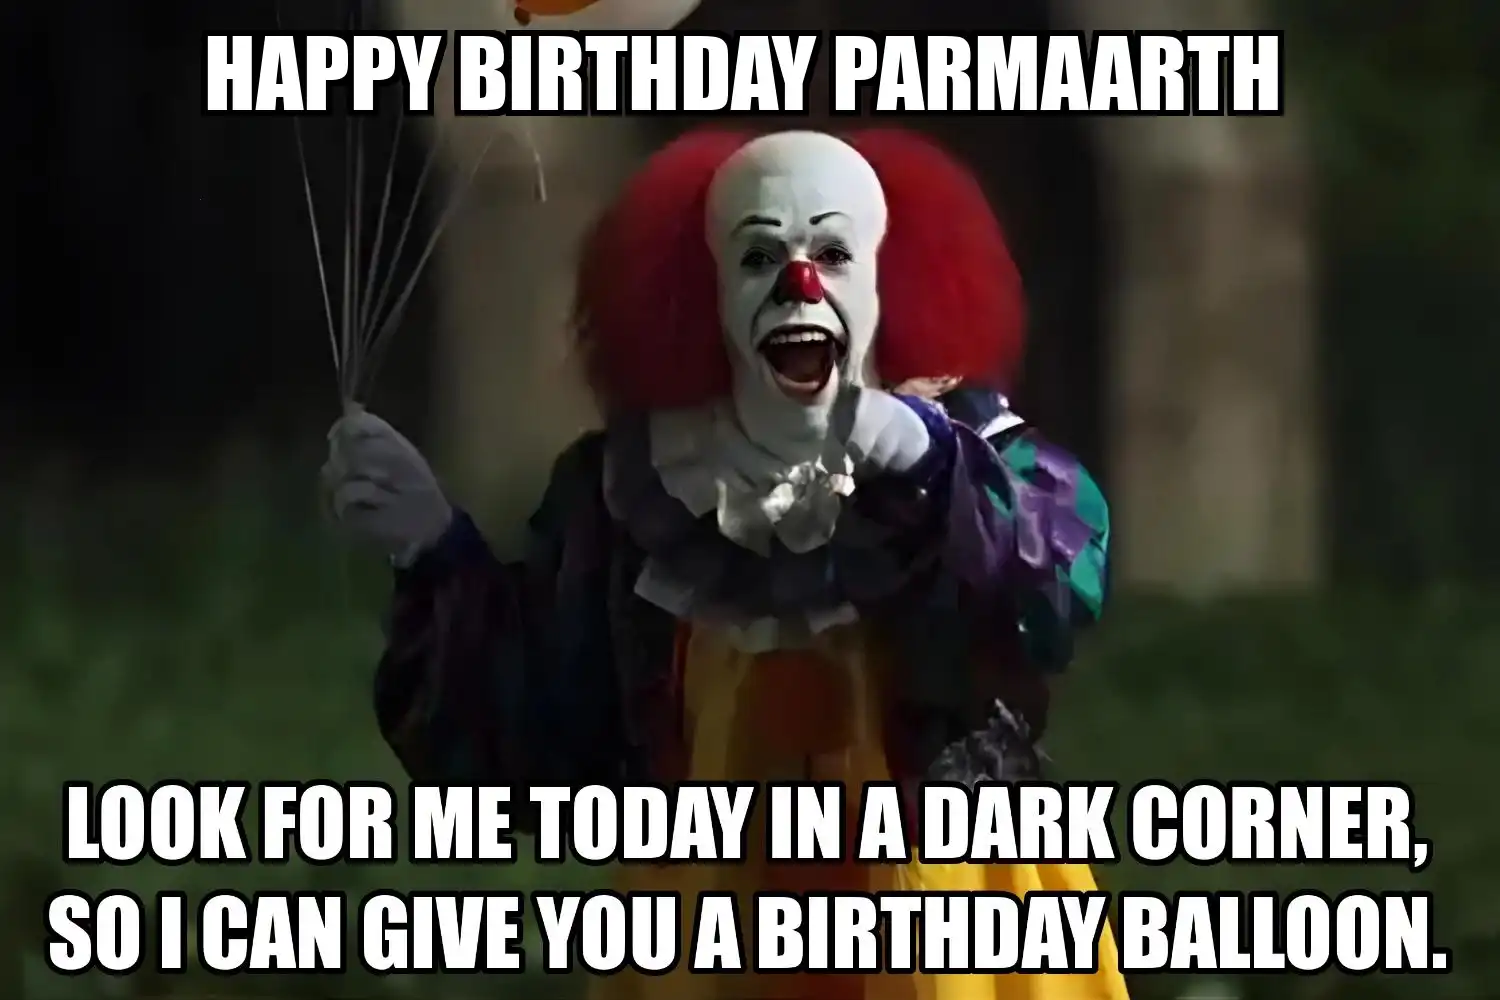 Happy Birthday Parmaarth I Can Give You A Balloon Meme